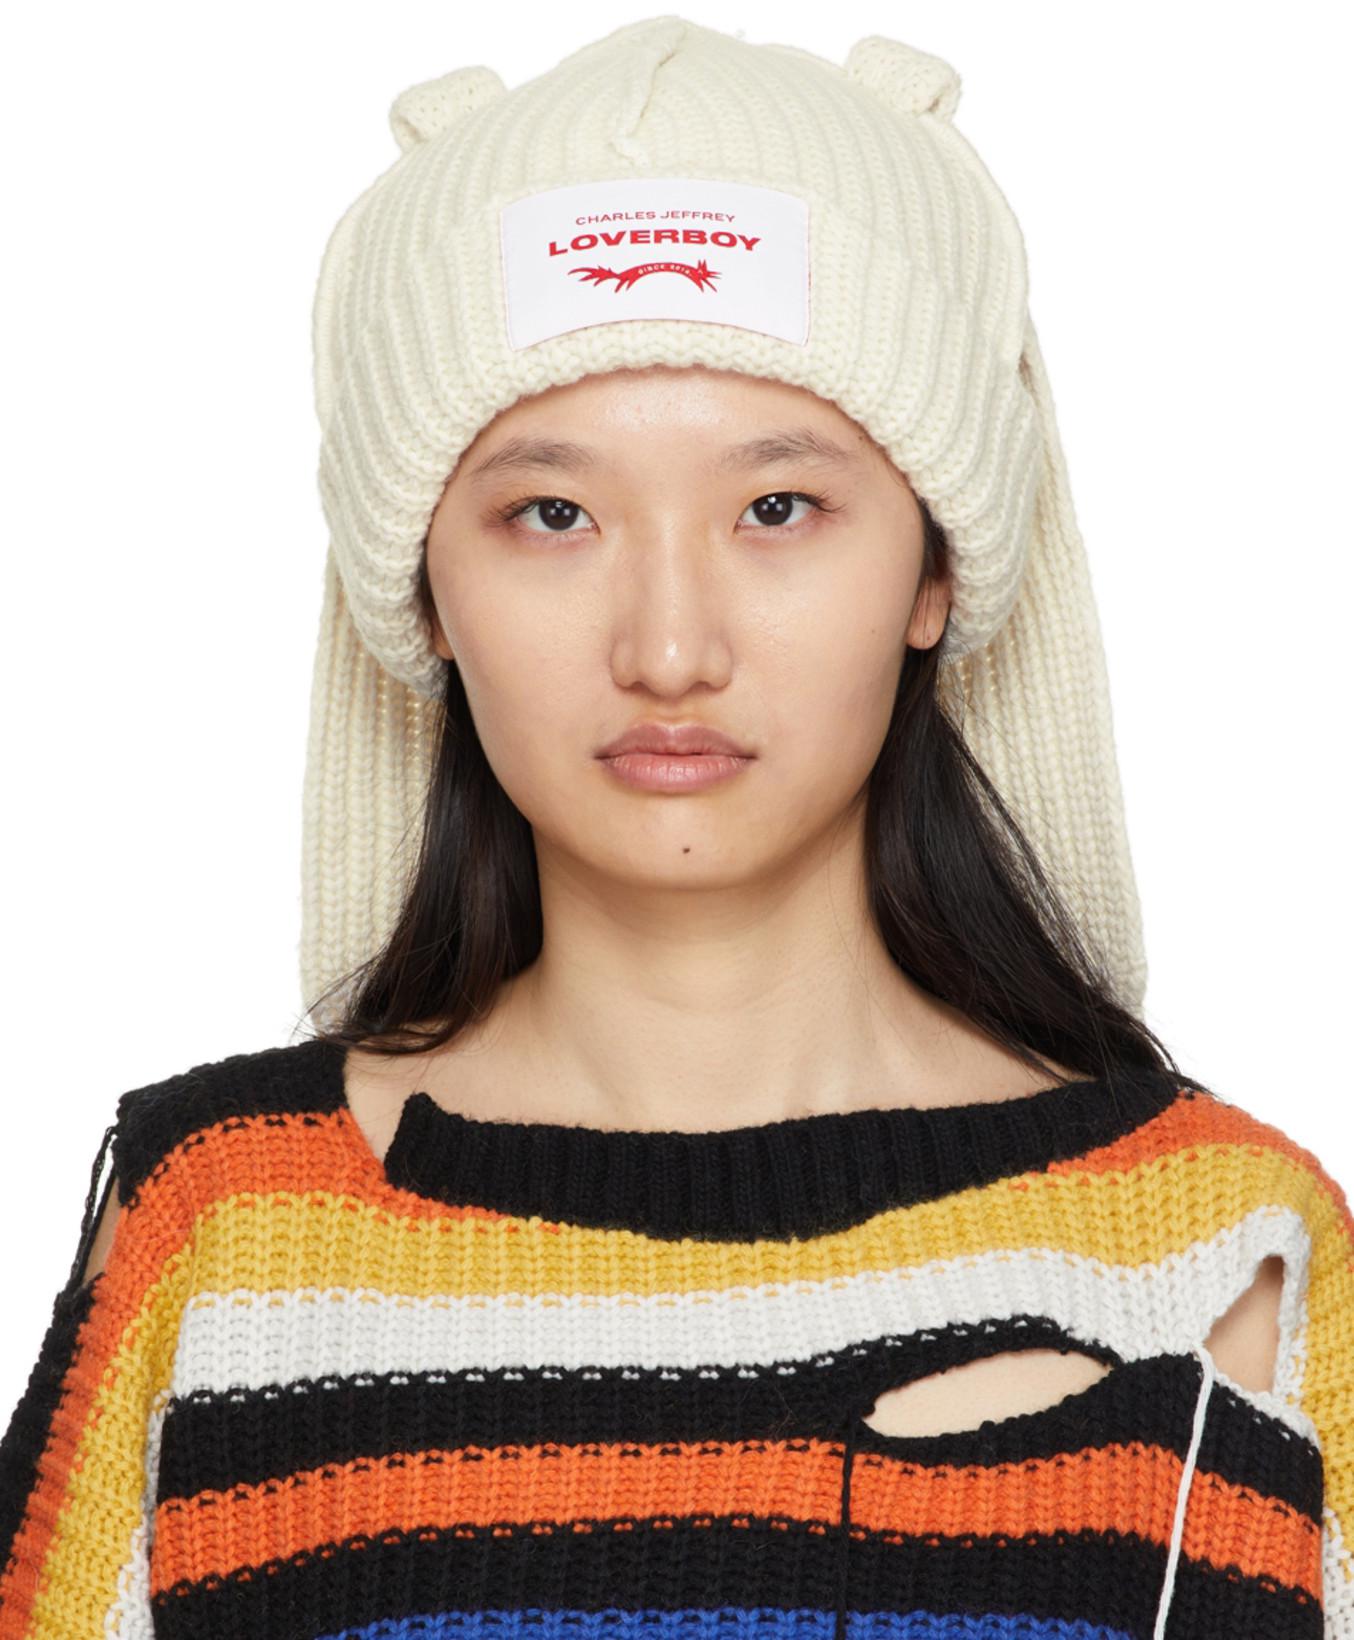 White Wool Chunky Rabbit Beanie by CHARLES JEFFREY LOVERBOY